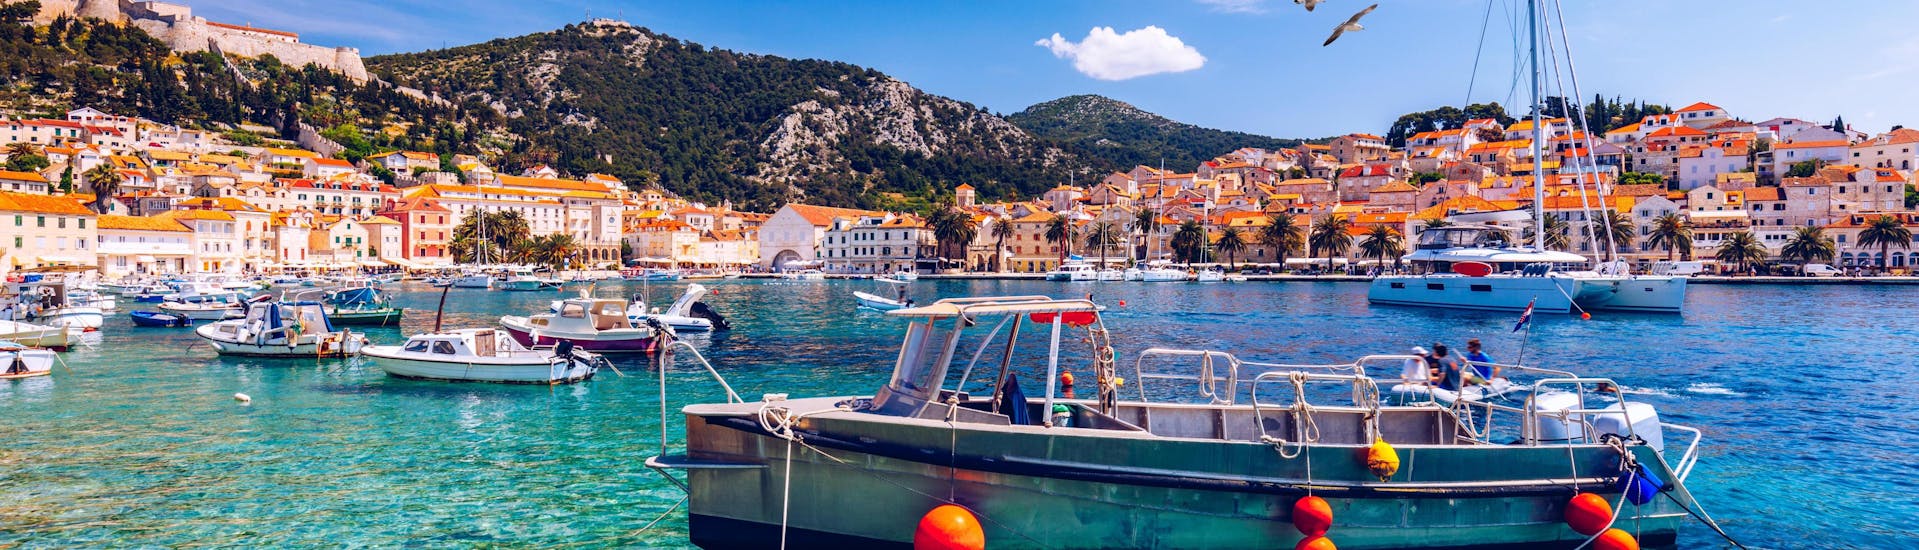 Boat trips from Hvar City are popular amongst tourists.